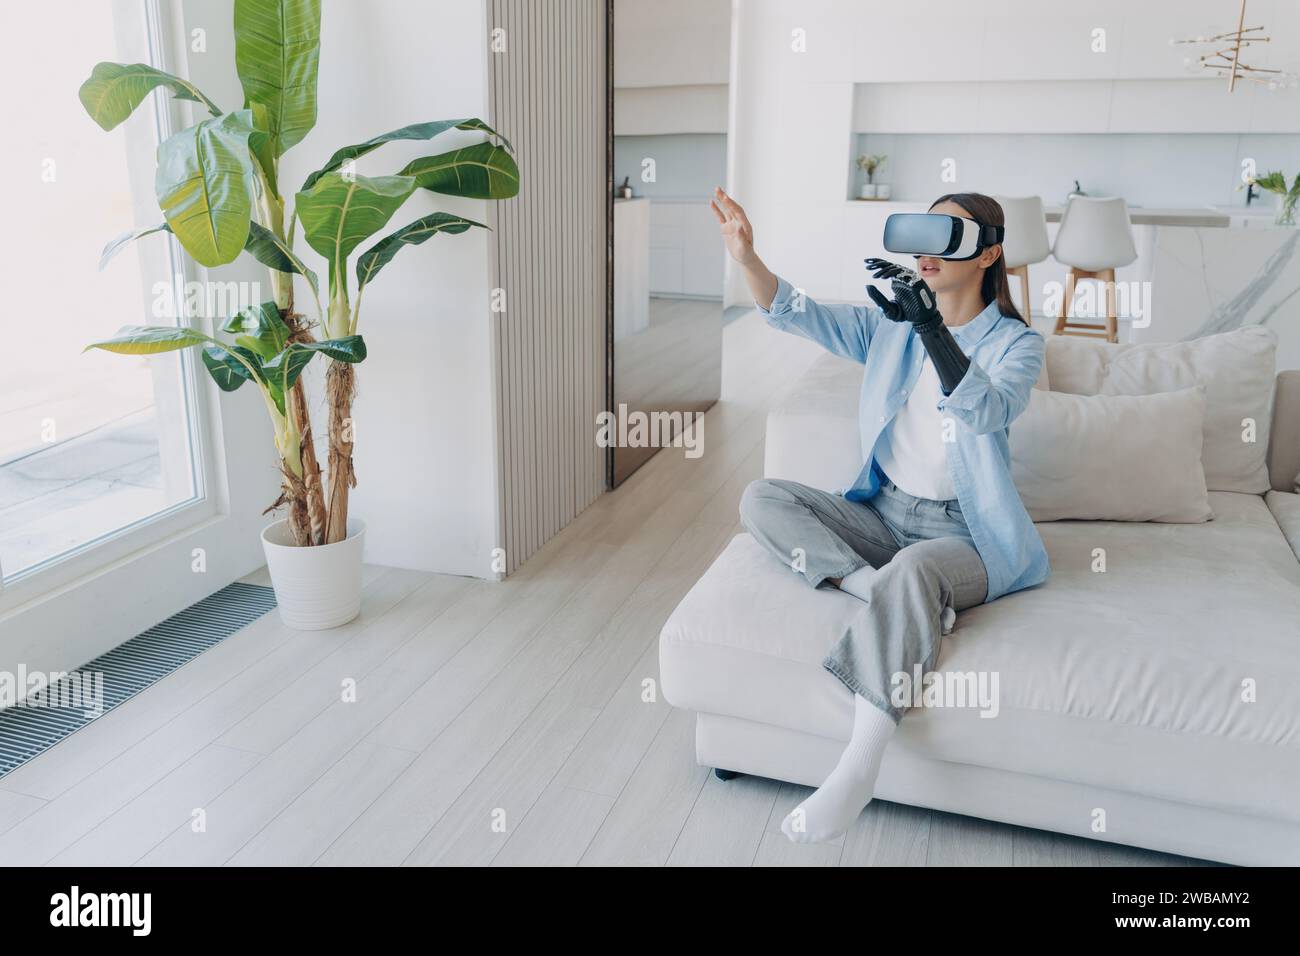 Amazed woman with prosthetic arm experiencing virtual reality, gesturing while seated on a couch in a sunlit room Stock Photo